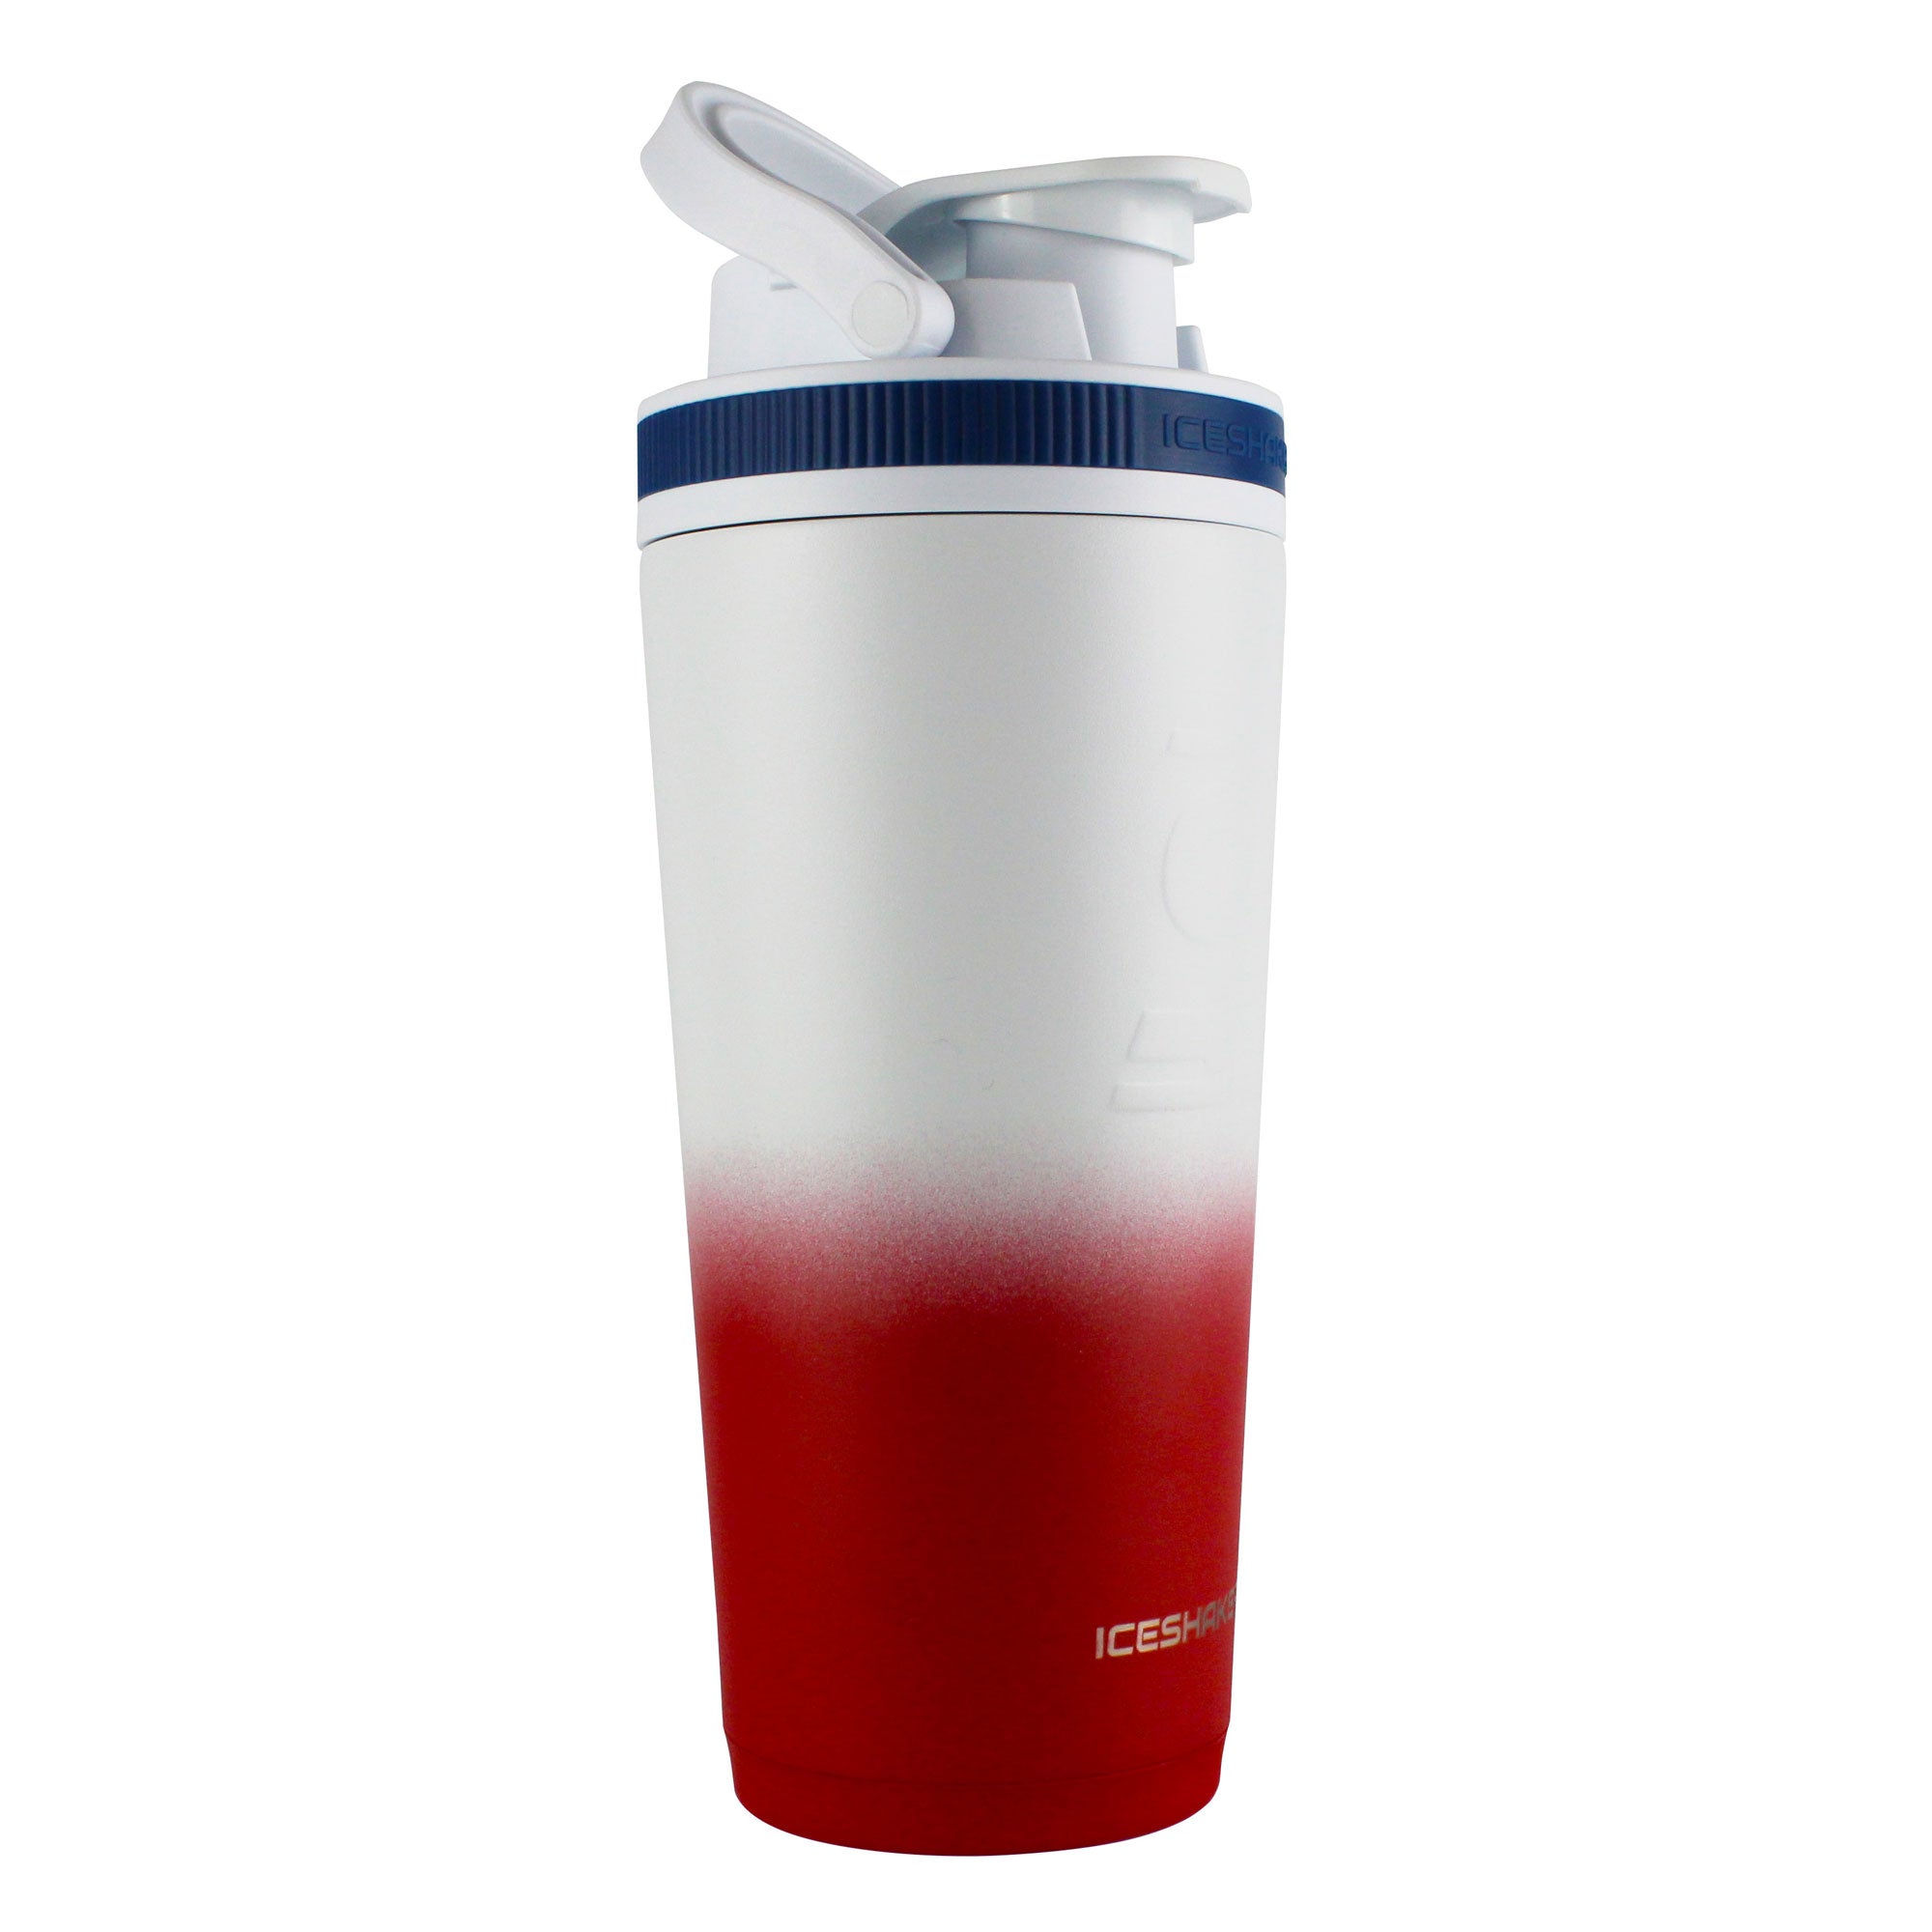 HG 26 Oz Ice Shaker Cup